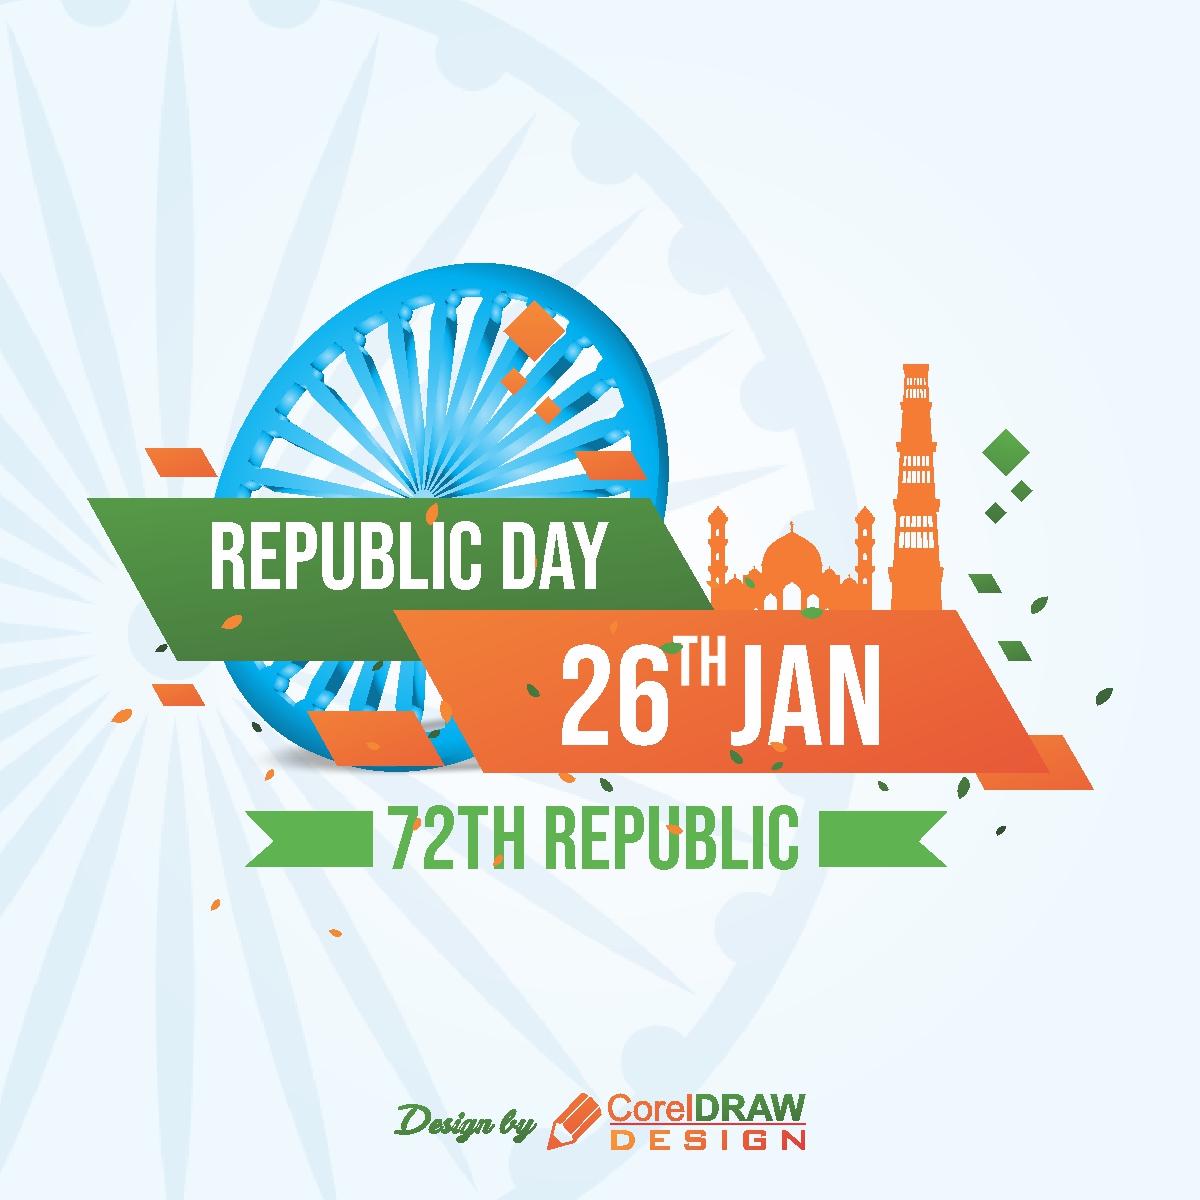 Republic day creative 26th jan 2021 trending cdr file download